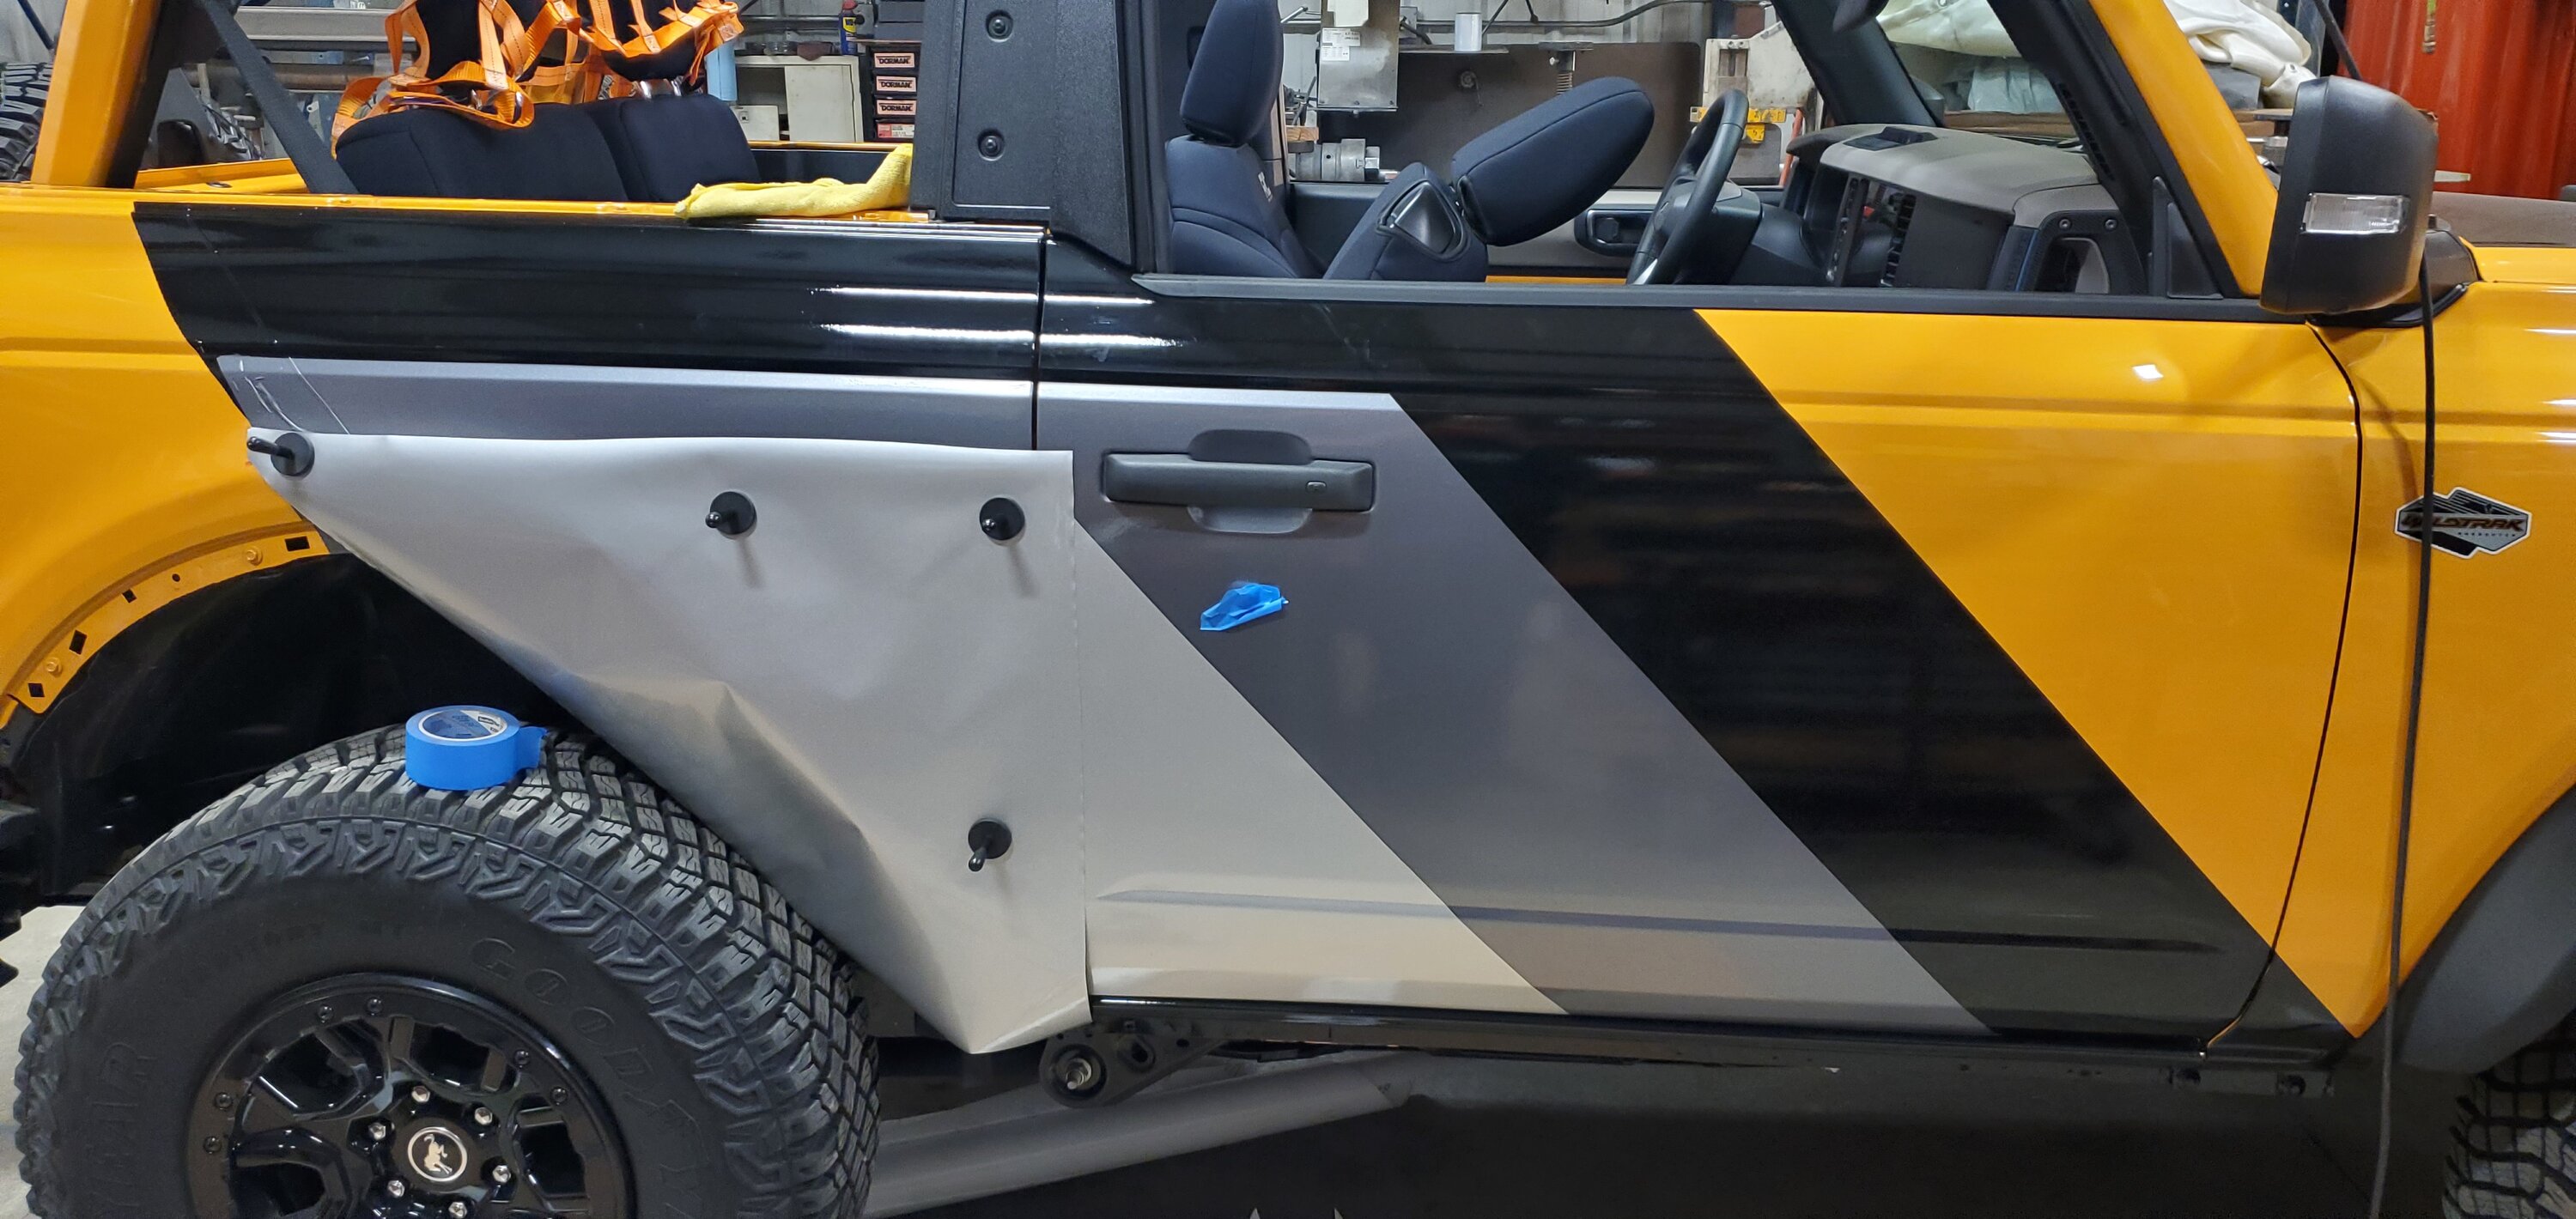 Ford Bronco Mud flaps are ugly, so I went another direction with vinyl wrap protection 1676047603757